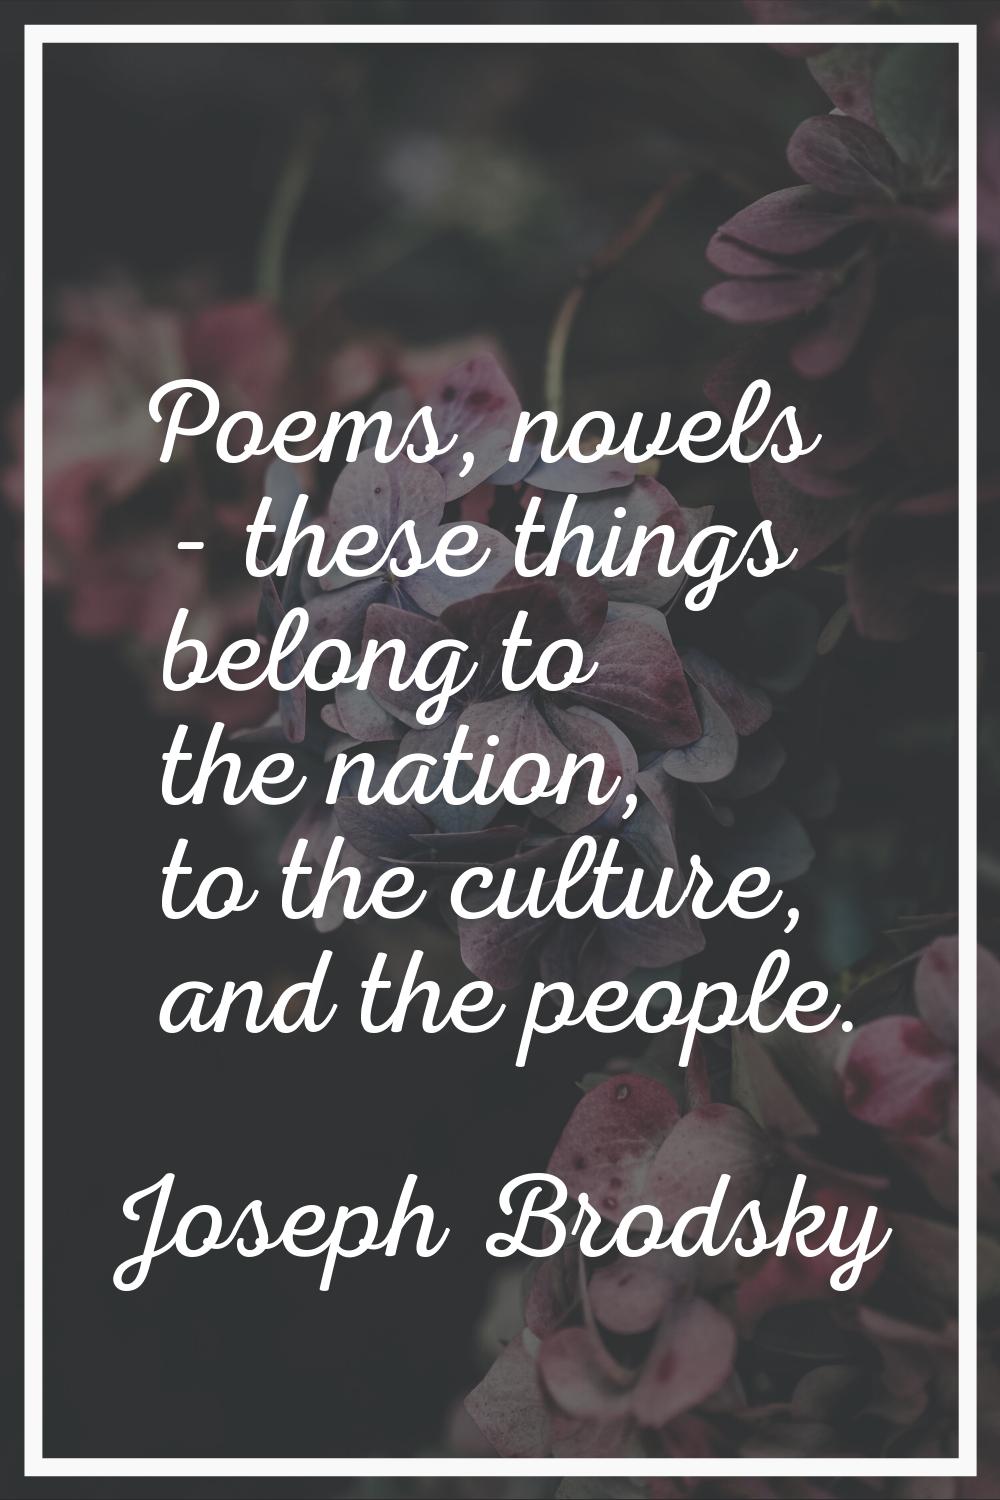 Poems, novels - these things belong to the nation, to the culture, and the people.